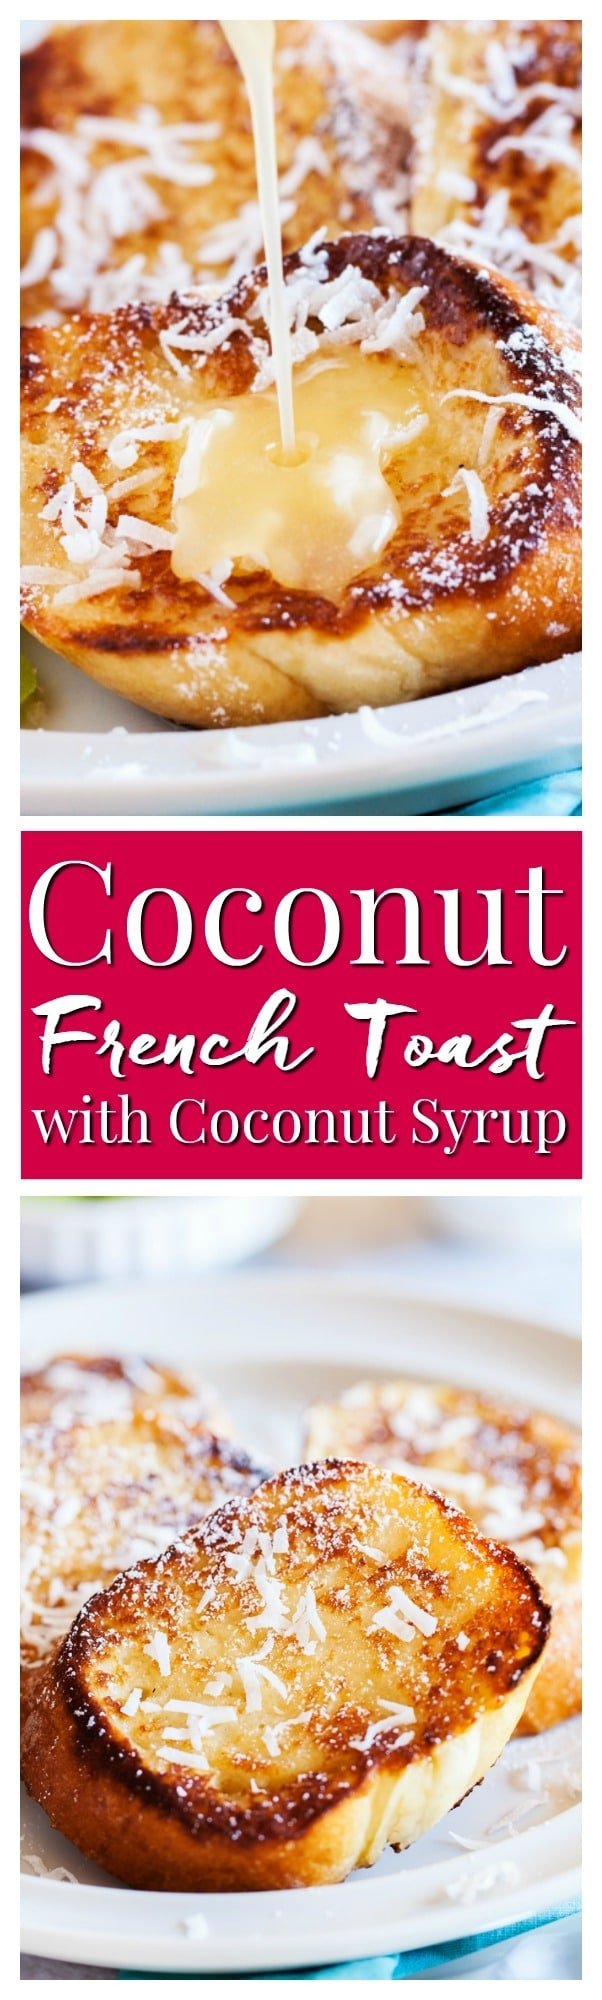 This Coconut French Toast is an easy breakfast that's served with an addictively delicious and creamy coconut syrup made with butter, buttermilk, sugar, and coconut extract! via @sugarandsoulco